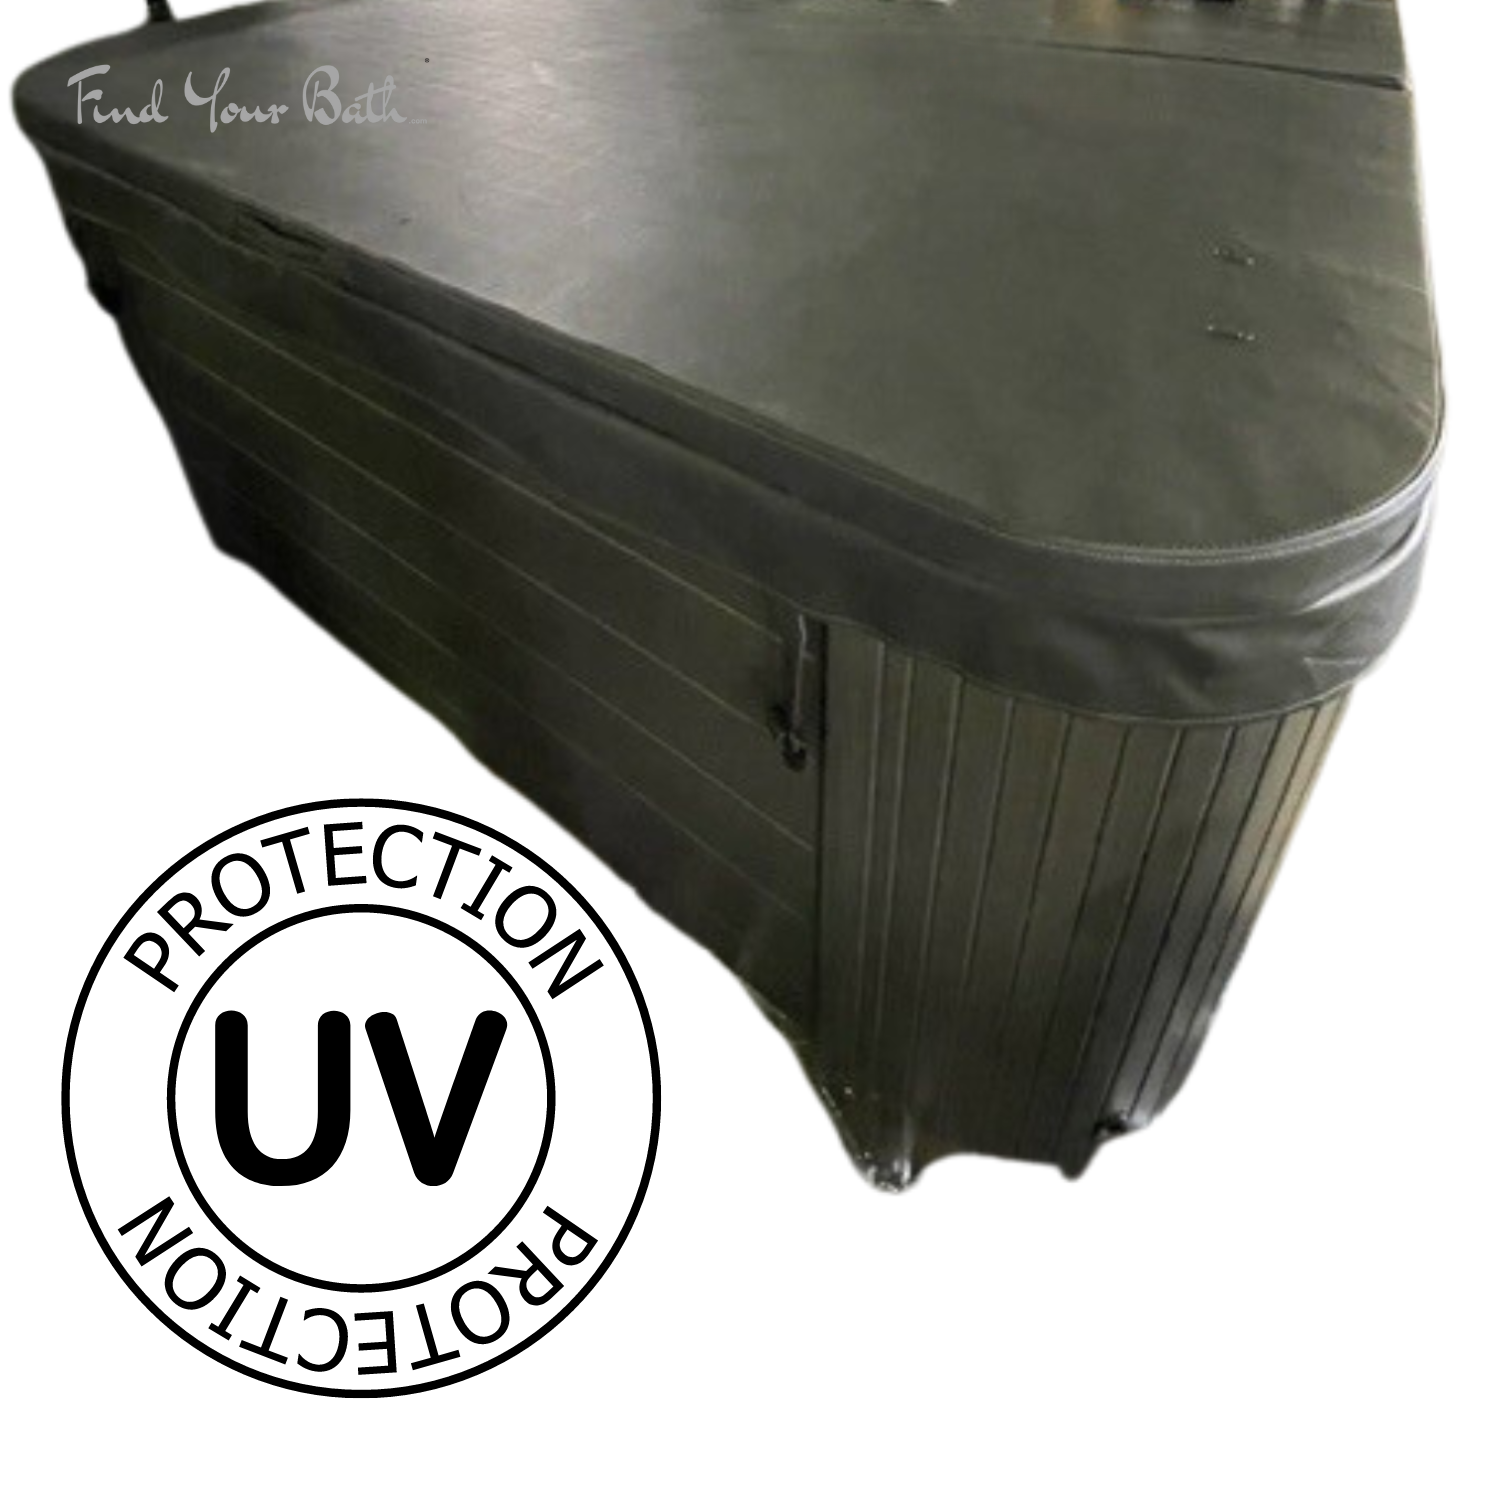 UV-rated insulated spa cover - Luxury Spas hot tub